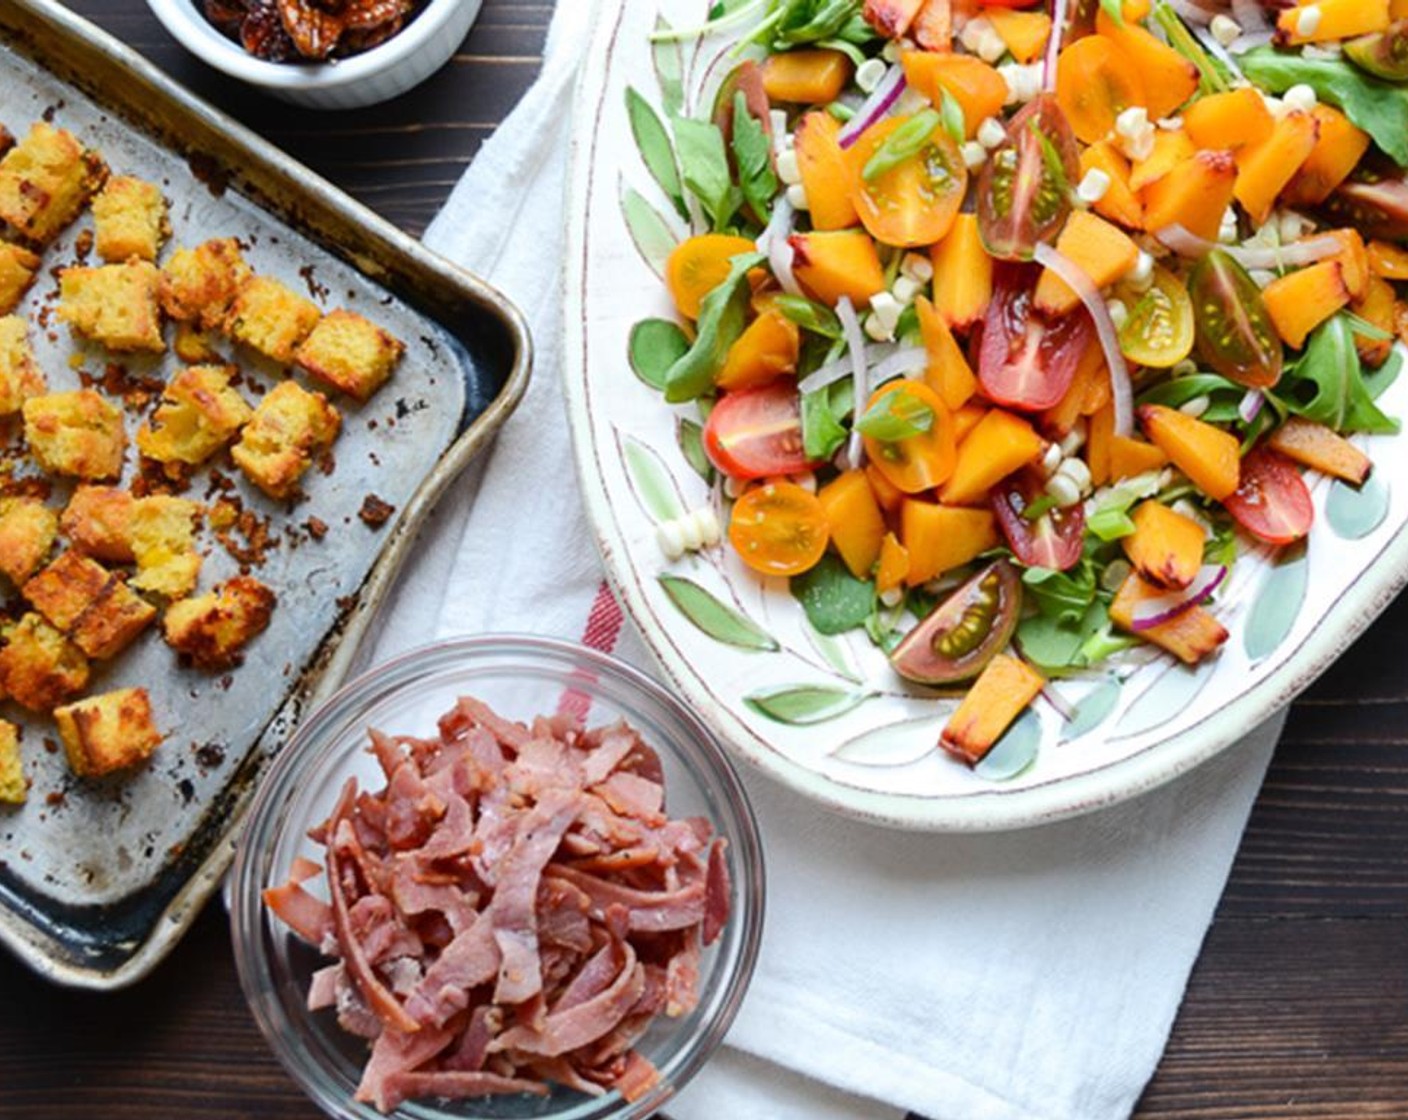 step 9 Sprinkle with peach, Cherry Tomato (1 cup), Country Ham Slices (8 oz), and Candied Pecans (1/2 cup). Top with croutons.